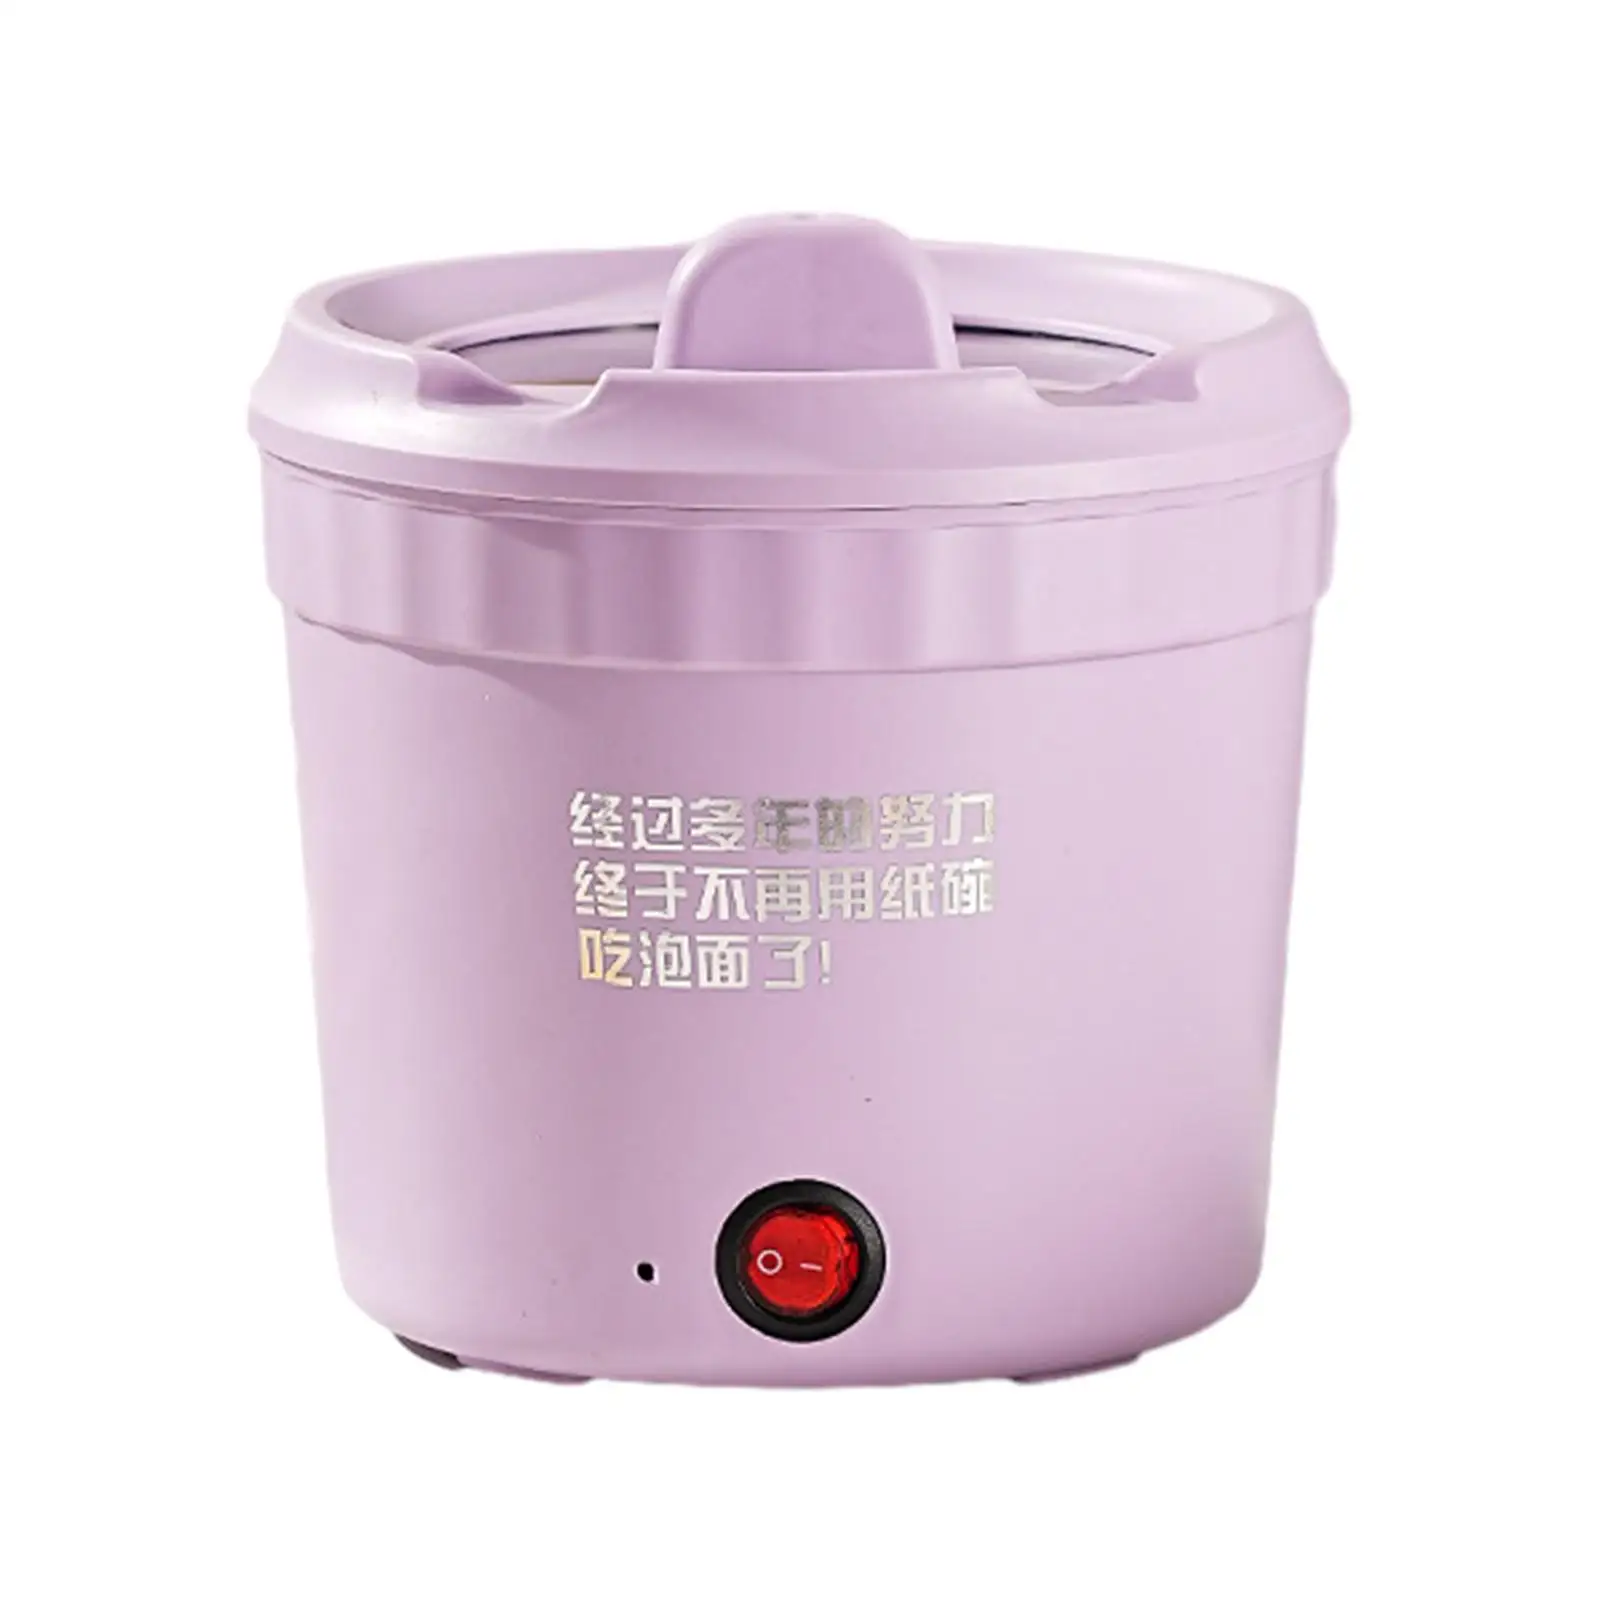 Mini Hot Pot Nonstick Portable Visible Lid Soup Steamer Multipurpose Electric Rice Cooker for Pasta Steak Oatmeal Fried Rice Egg